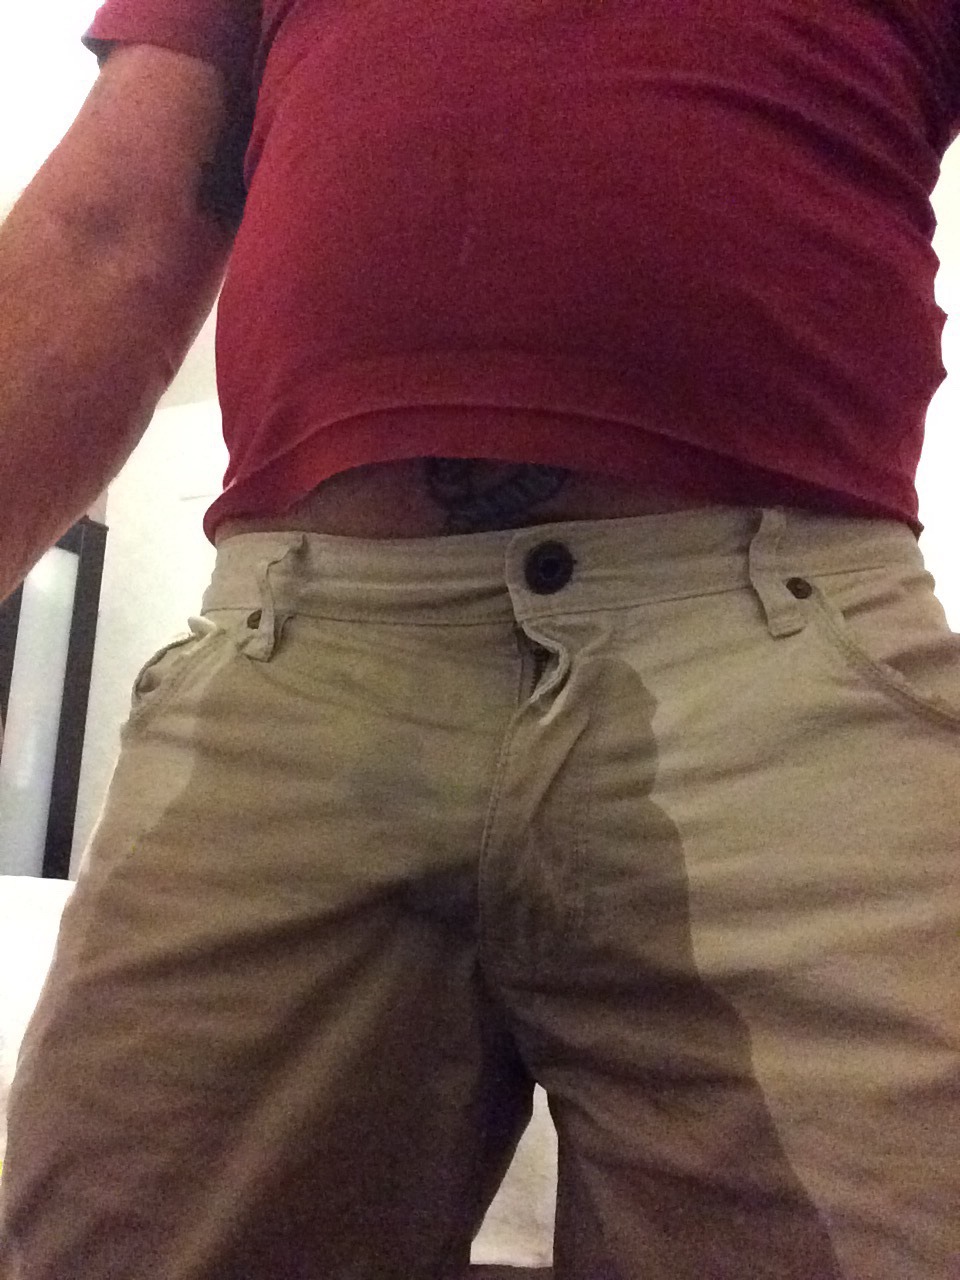 tattsandkink1:Was smoking a joint and needed to piss so did it my trousers going